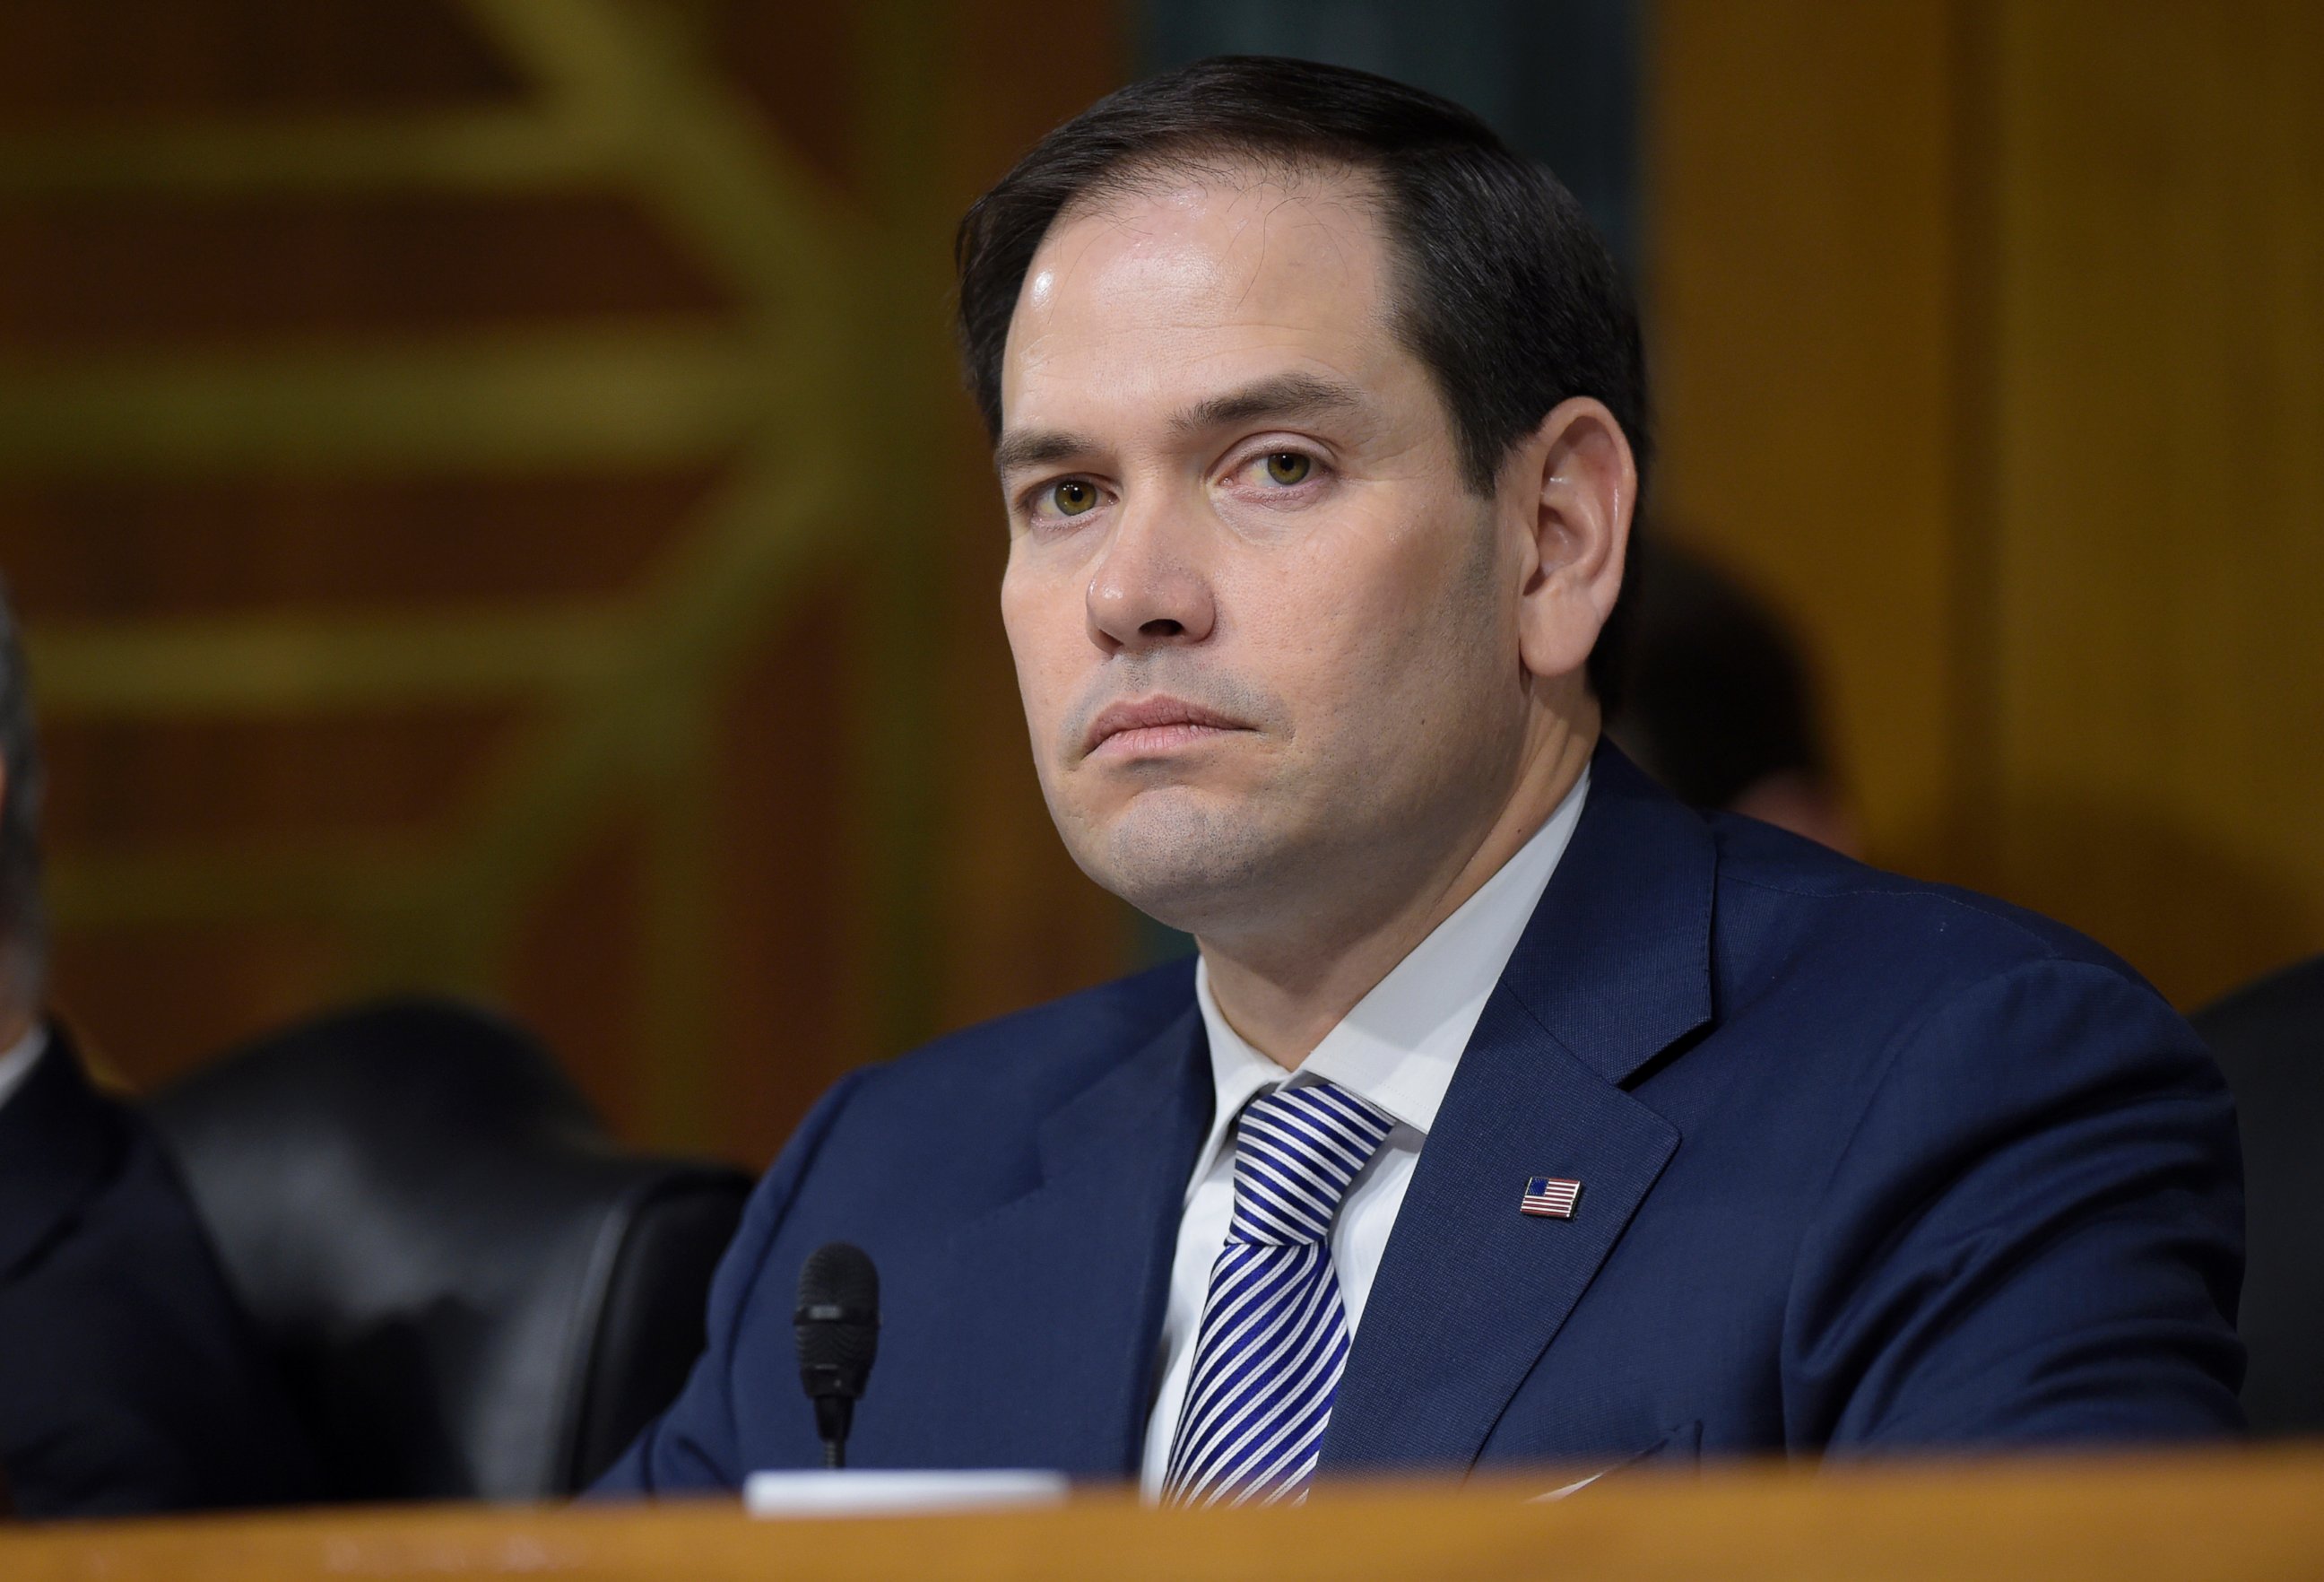 PHOTO: Sen. Marco Rubio listens to testimony during a Senate Intelligence Committee hearing on Capitol Hill in Washington,March 30, 2017, on Russian intelligence activities.